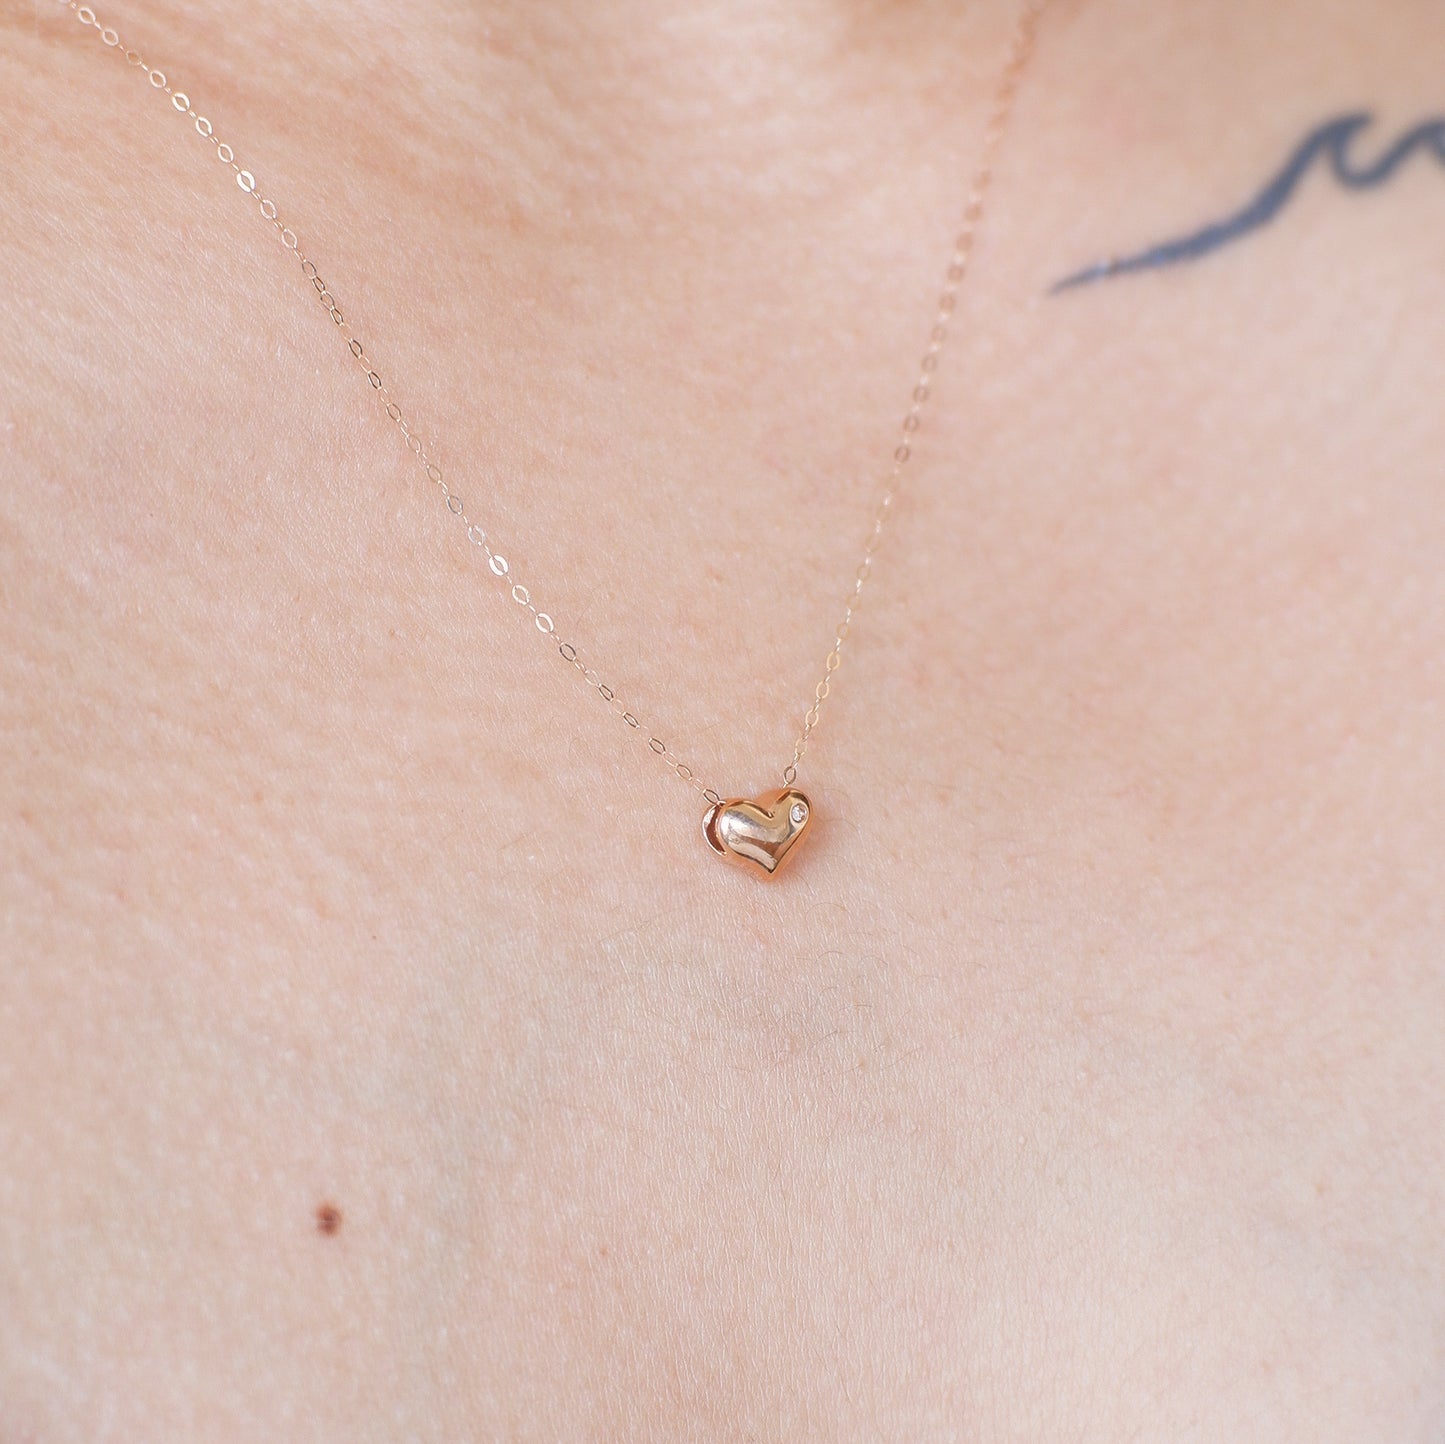 The Ultra Thin Heart Diamond Necklace in Solid Gold